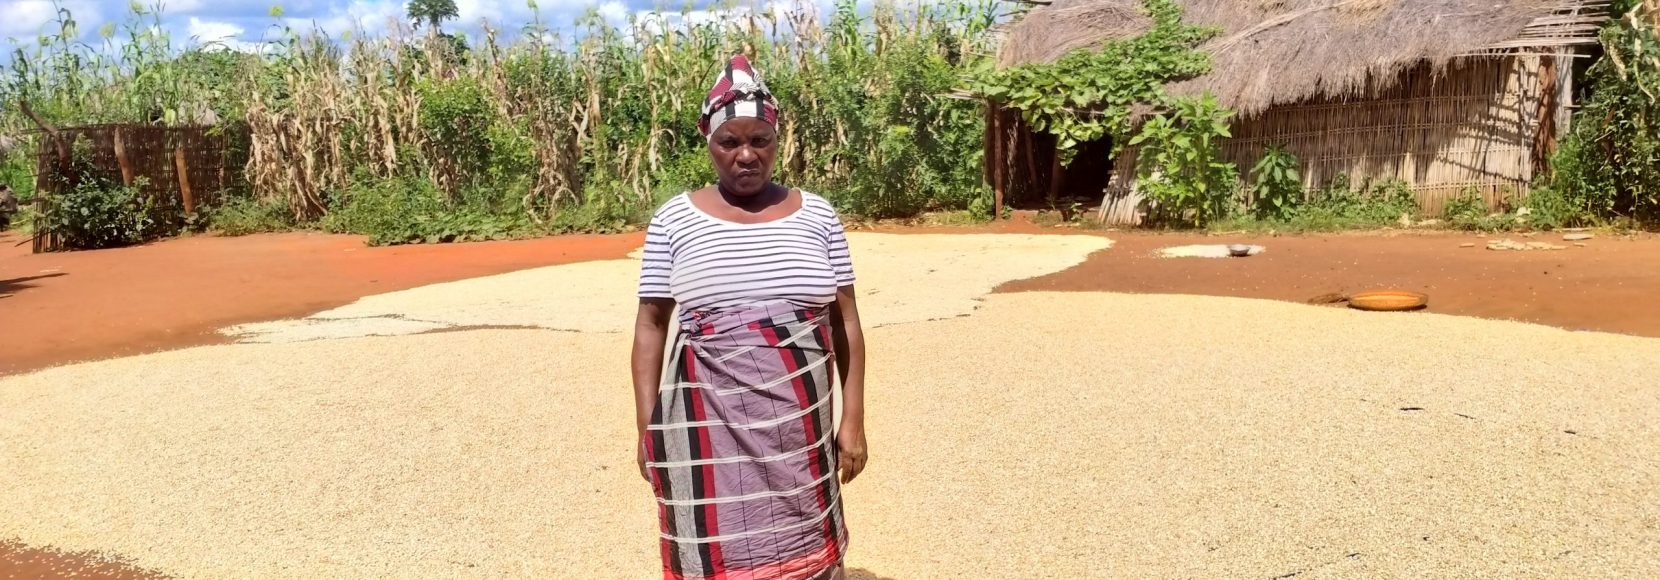 Jacinta Fernando is one of many farmers in northern Mozambique dealing with multiple crises at once. In this photo, she stands in front of her soy harvest.